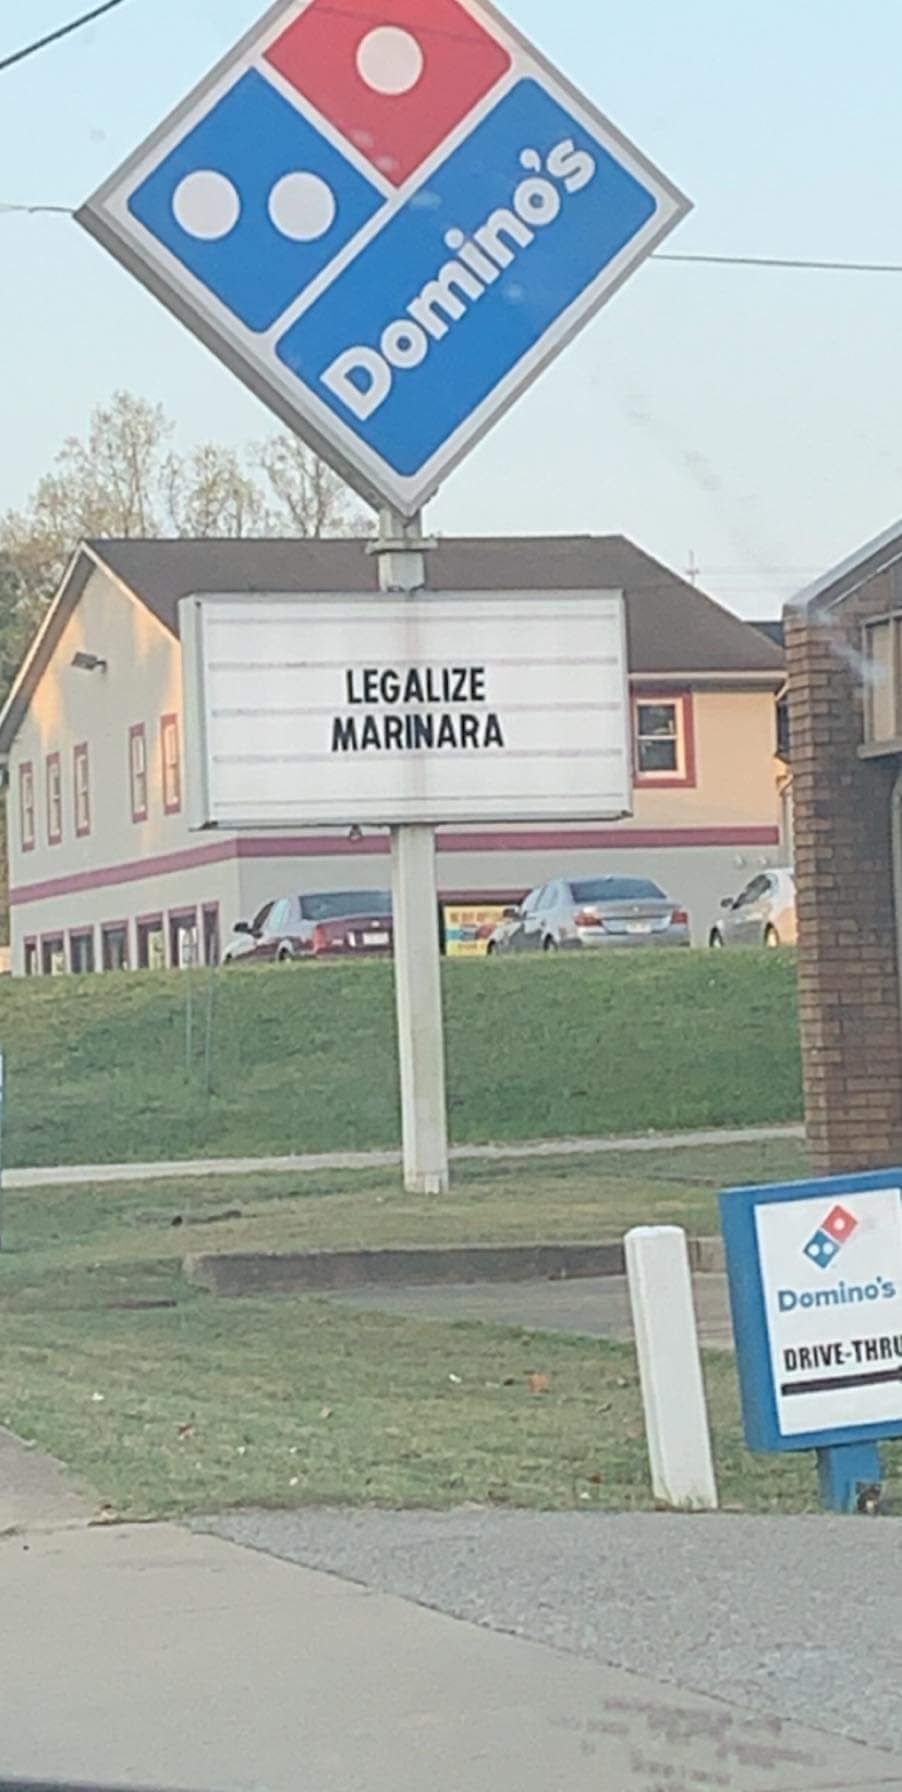 My local Domino's is fighting for our rights!